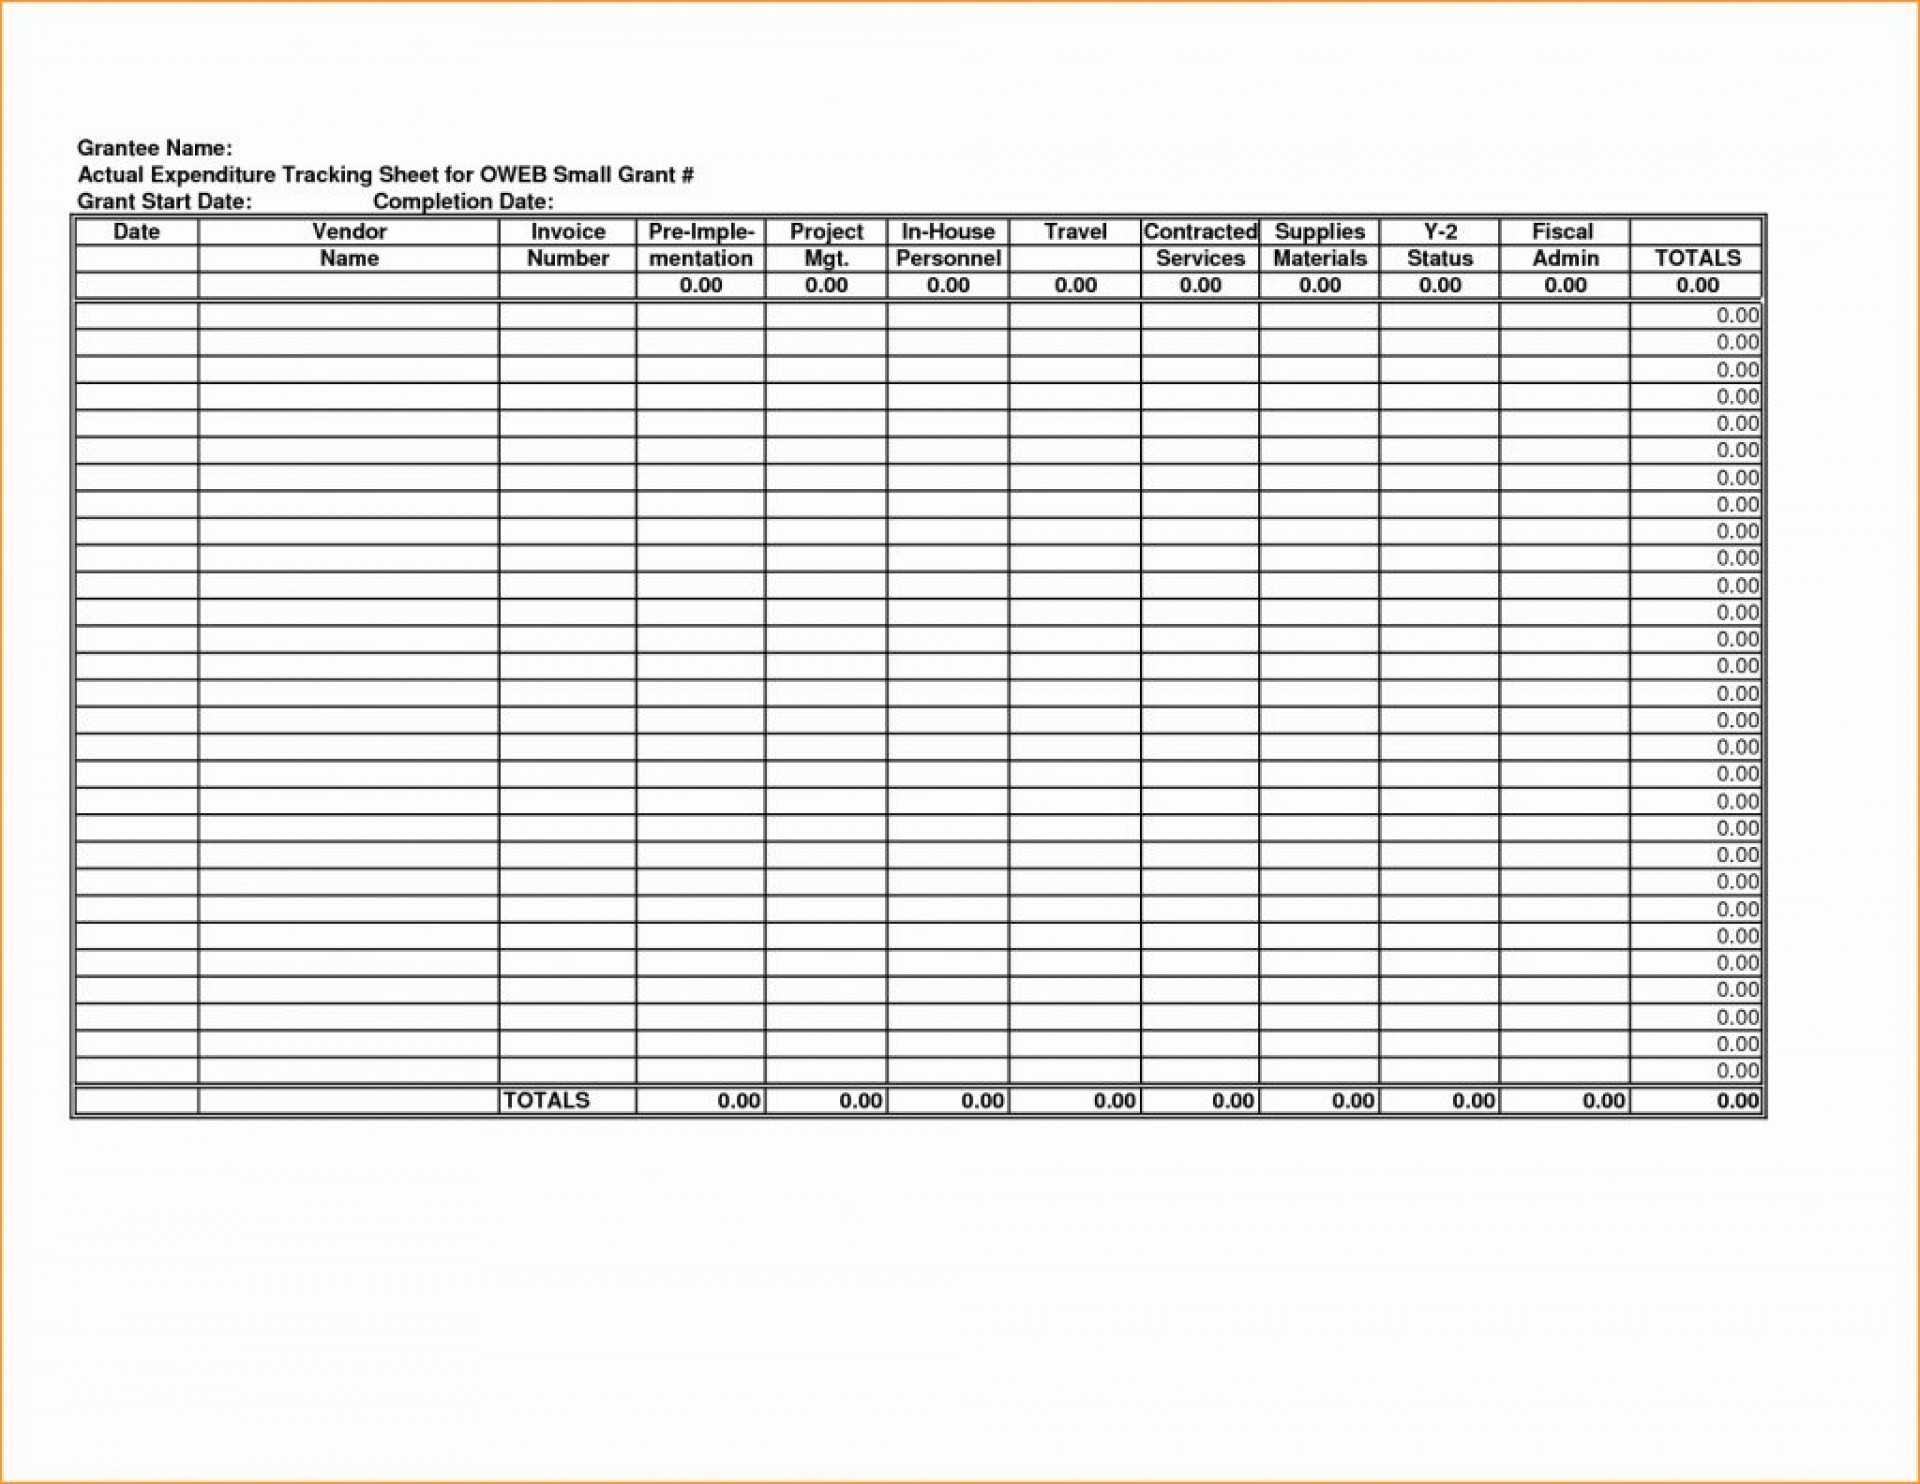 023 Expense Report Template Excel Small Business Elegant Pertaining To Expense Report Spreadsheet Template Excel